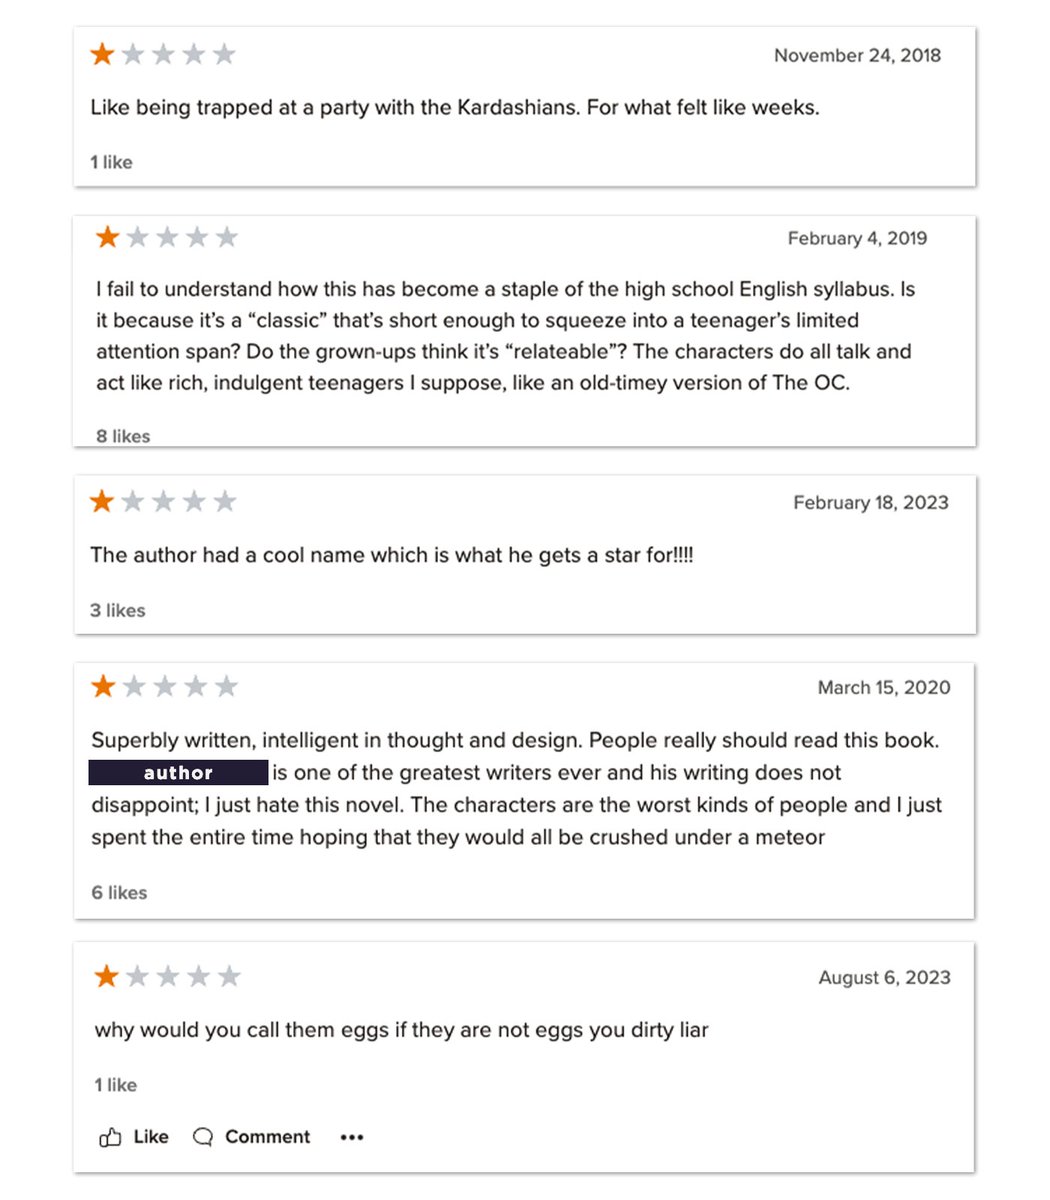 Bringing back a classic: can you name that book based on its 1-star Goodreads Review snippets alone?